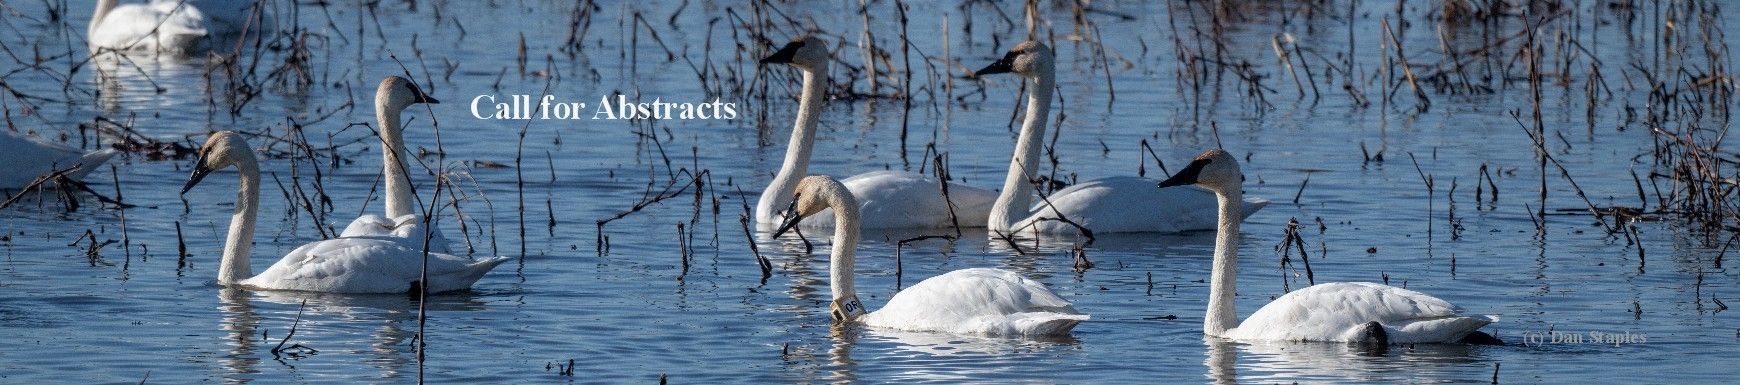 Call for Abstracts for the Swan Symposium and 26th Swan Conference